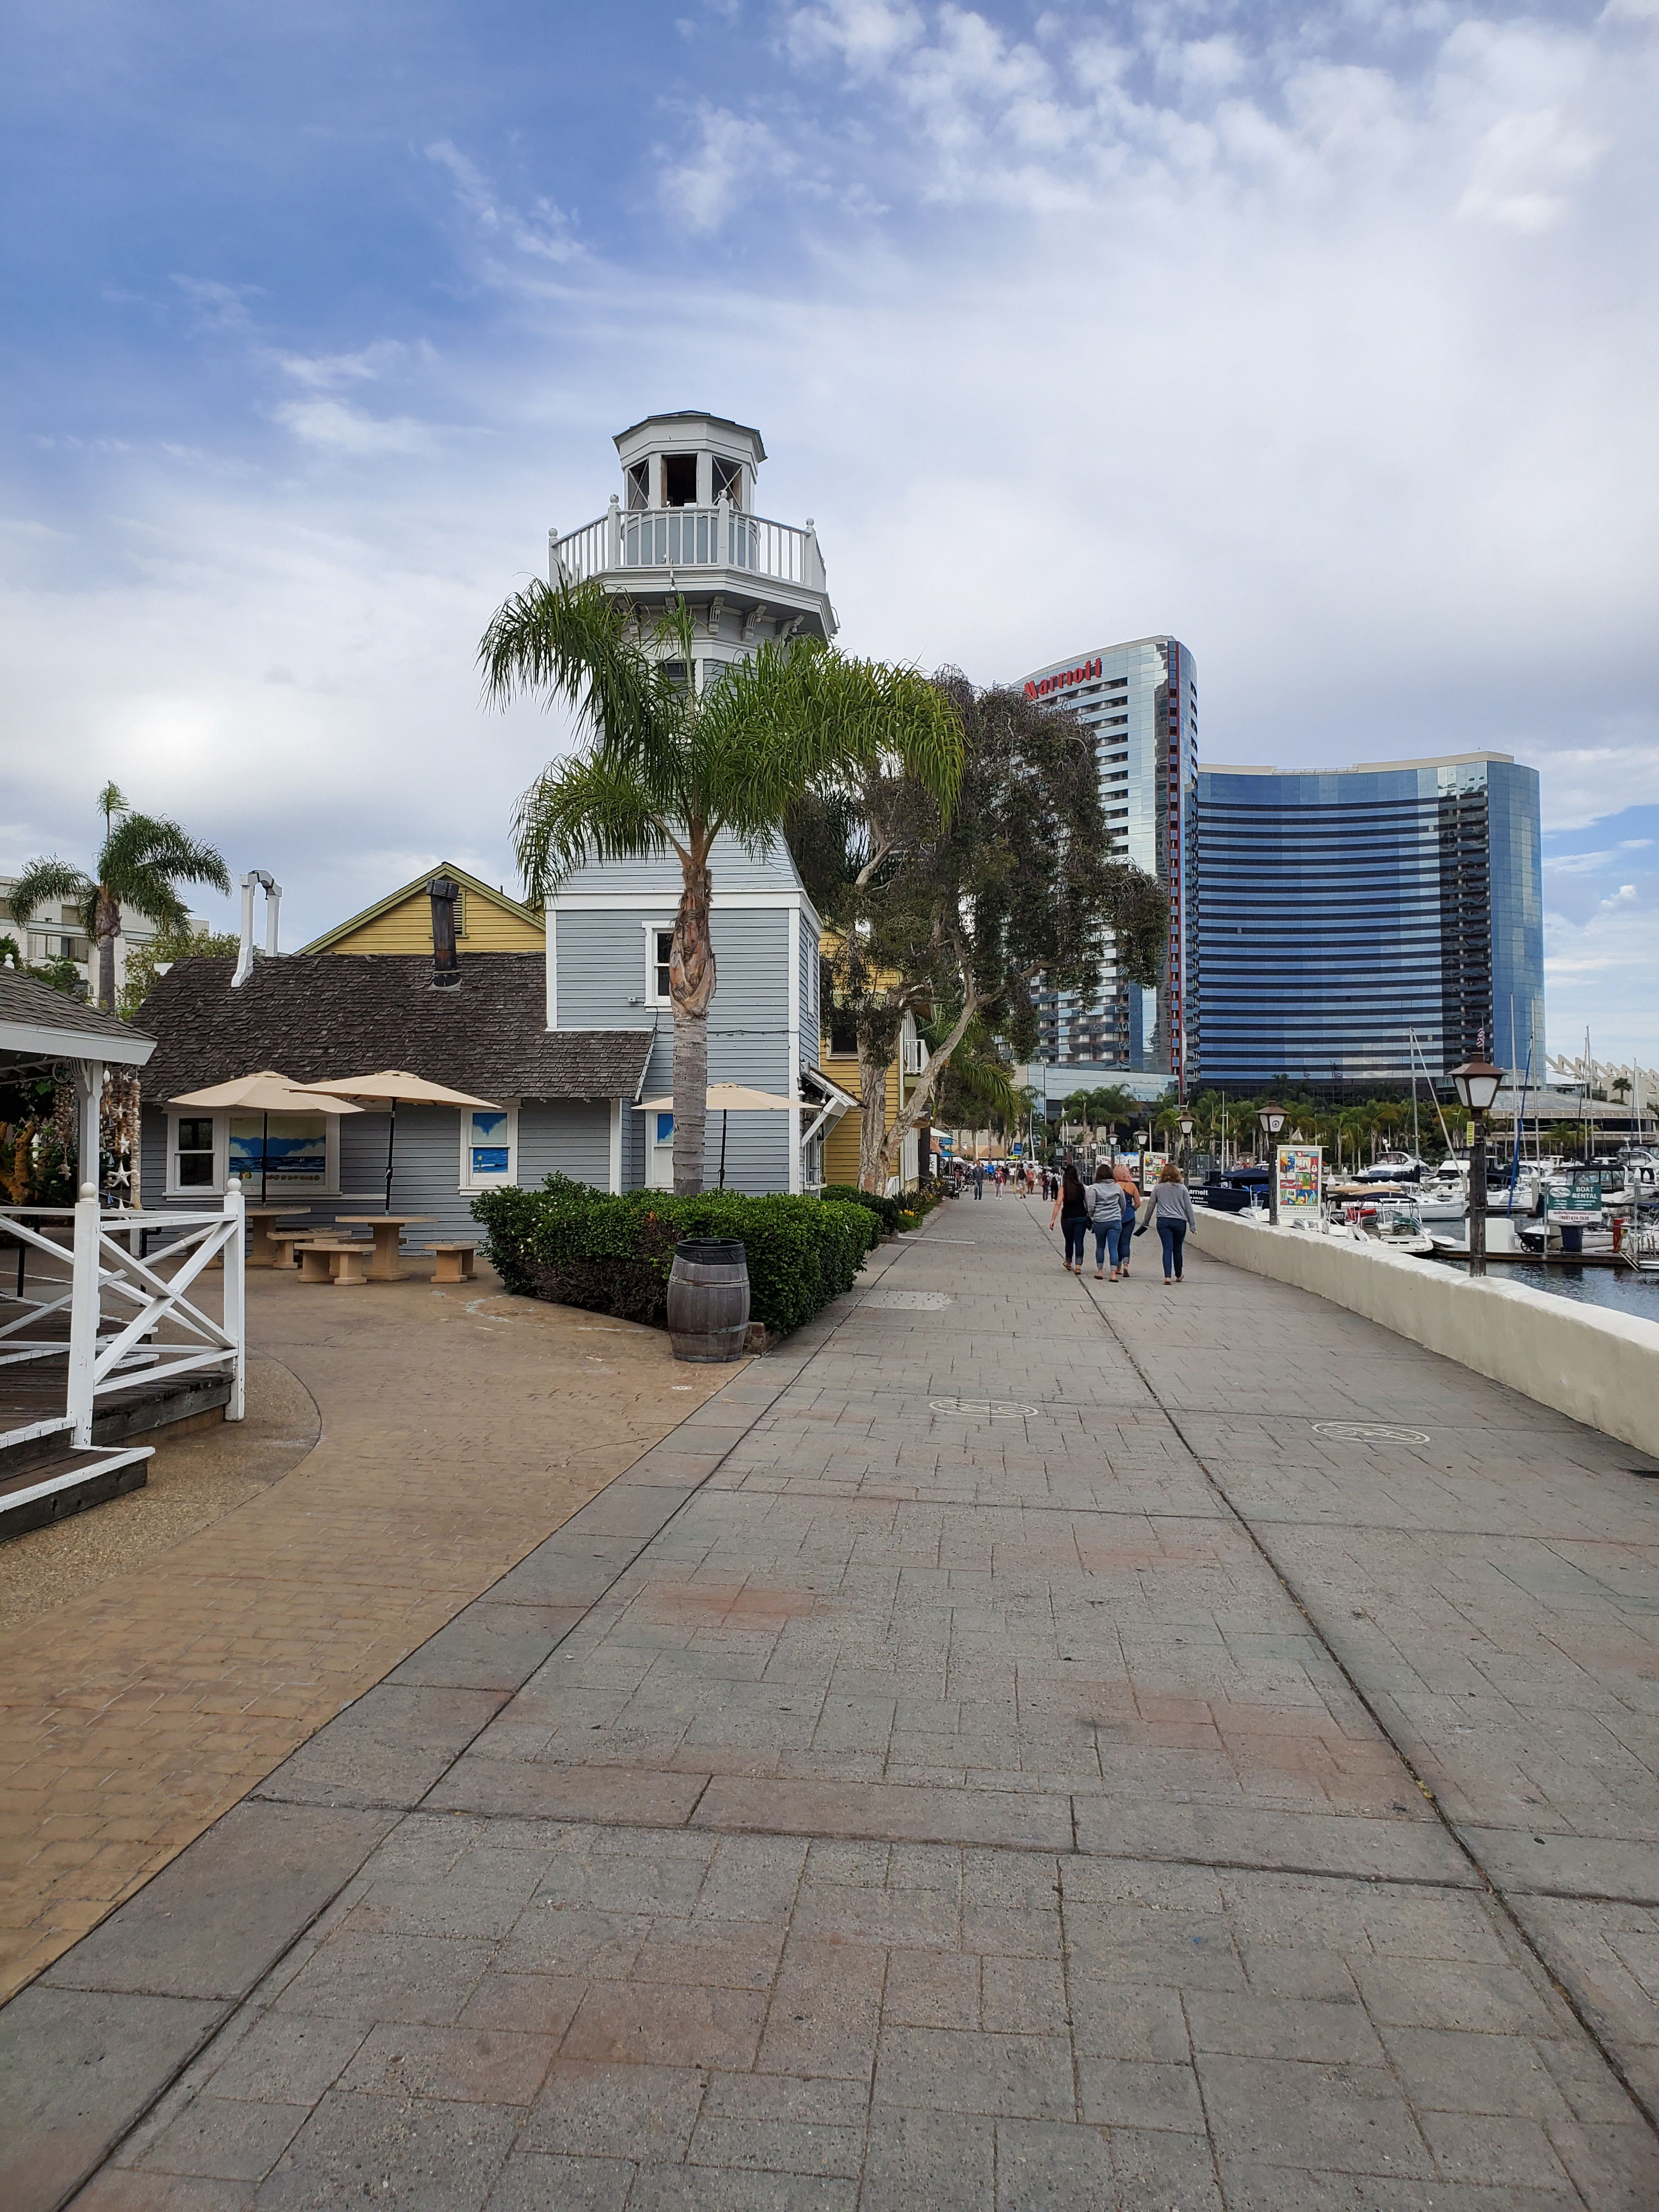 Seaport Village San Diego: A Complete Guide